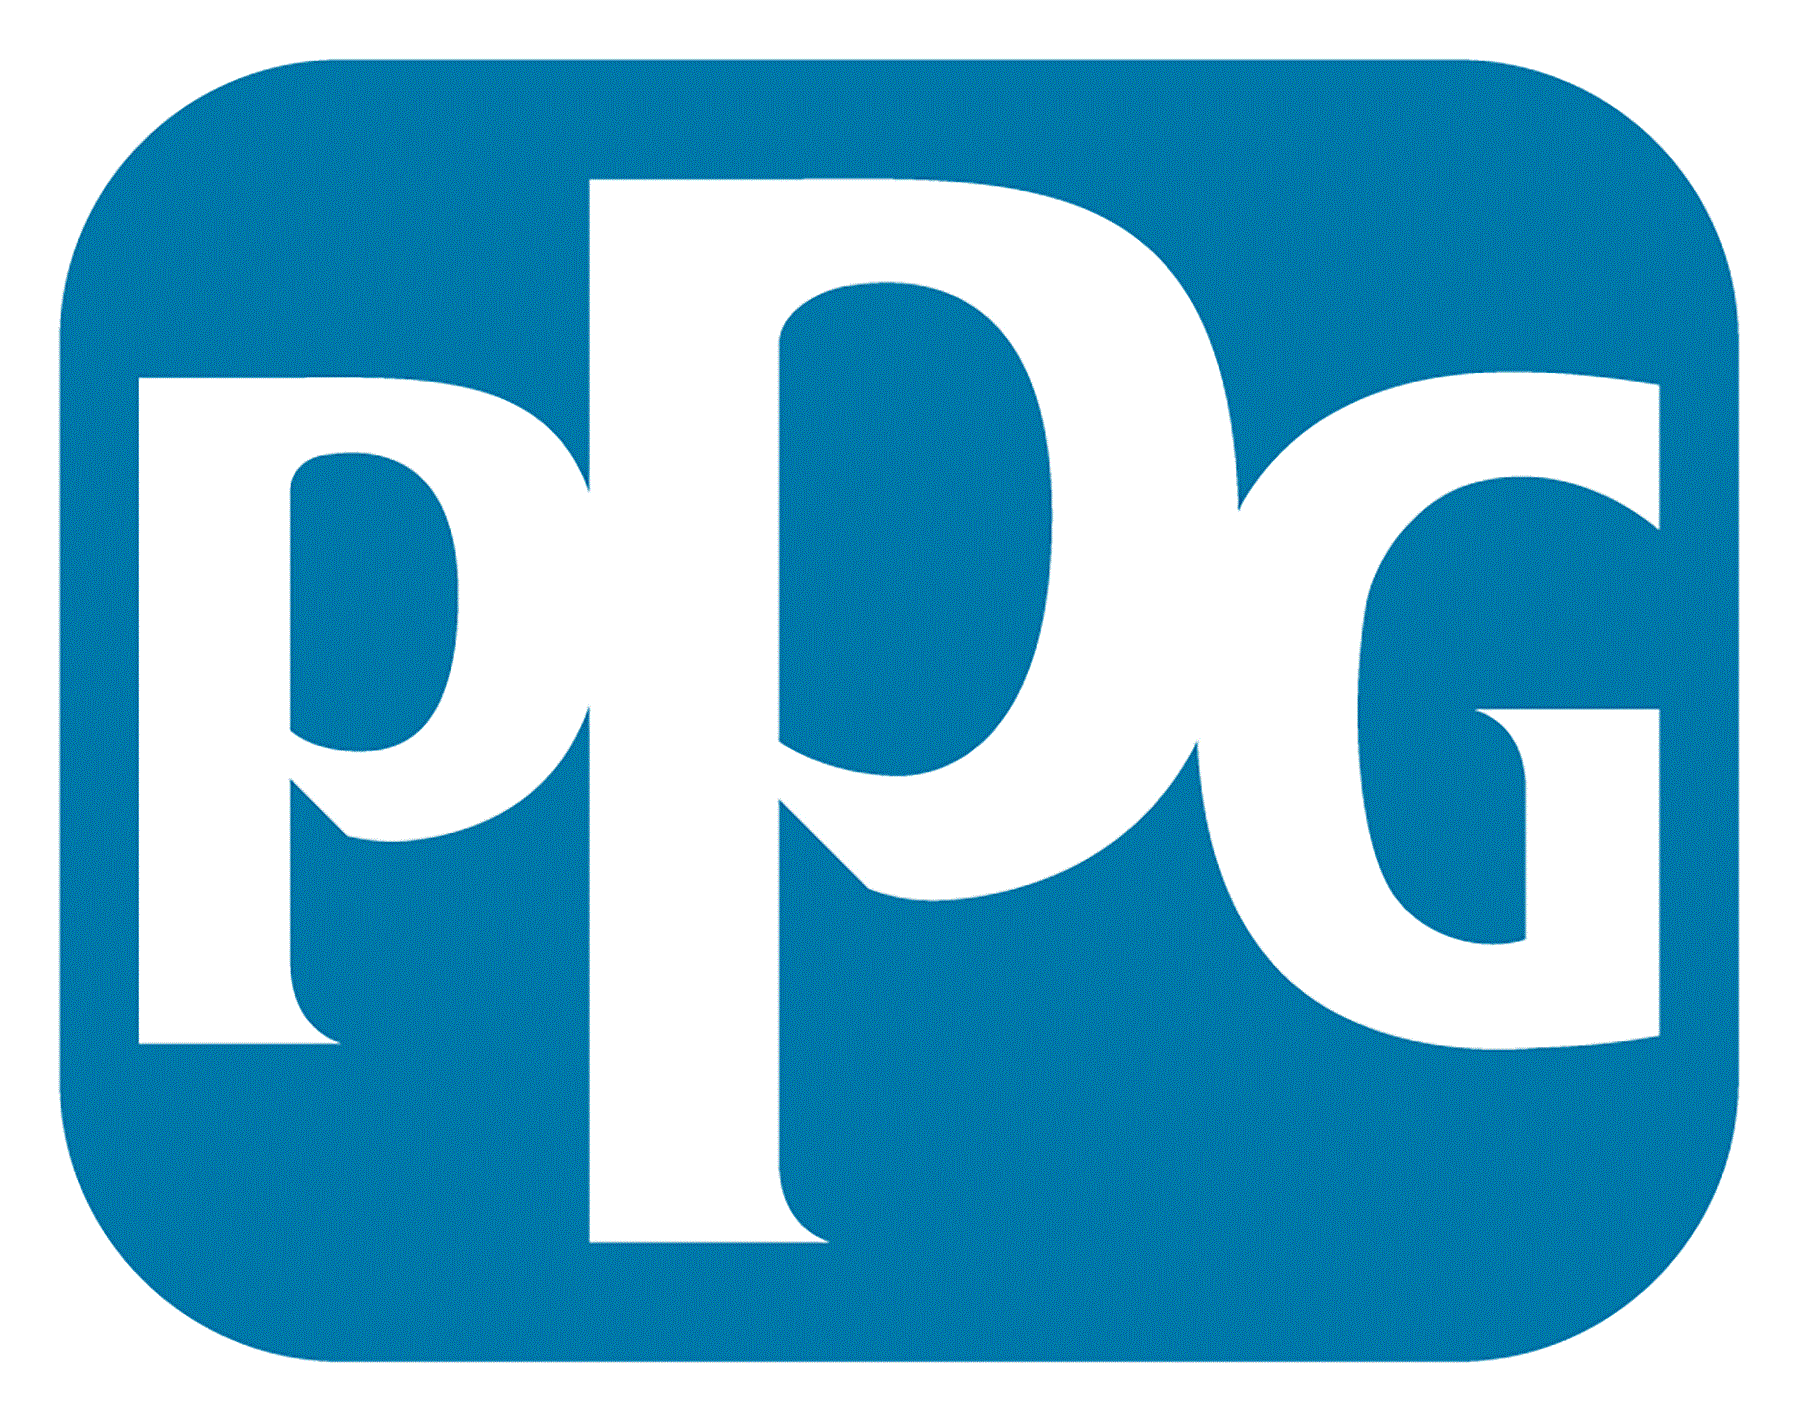 PPG MSDS Search